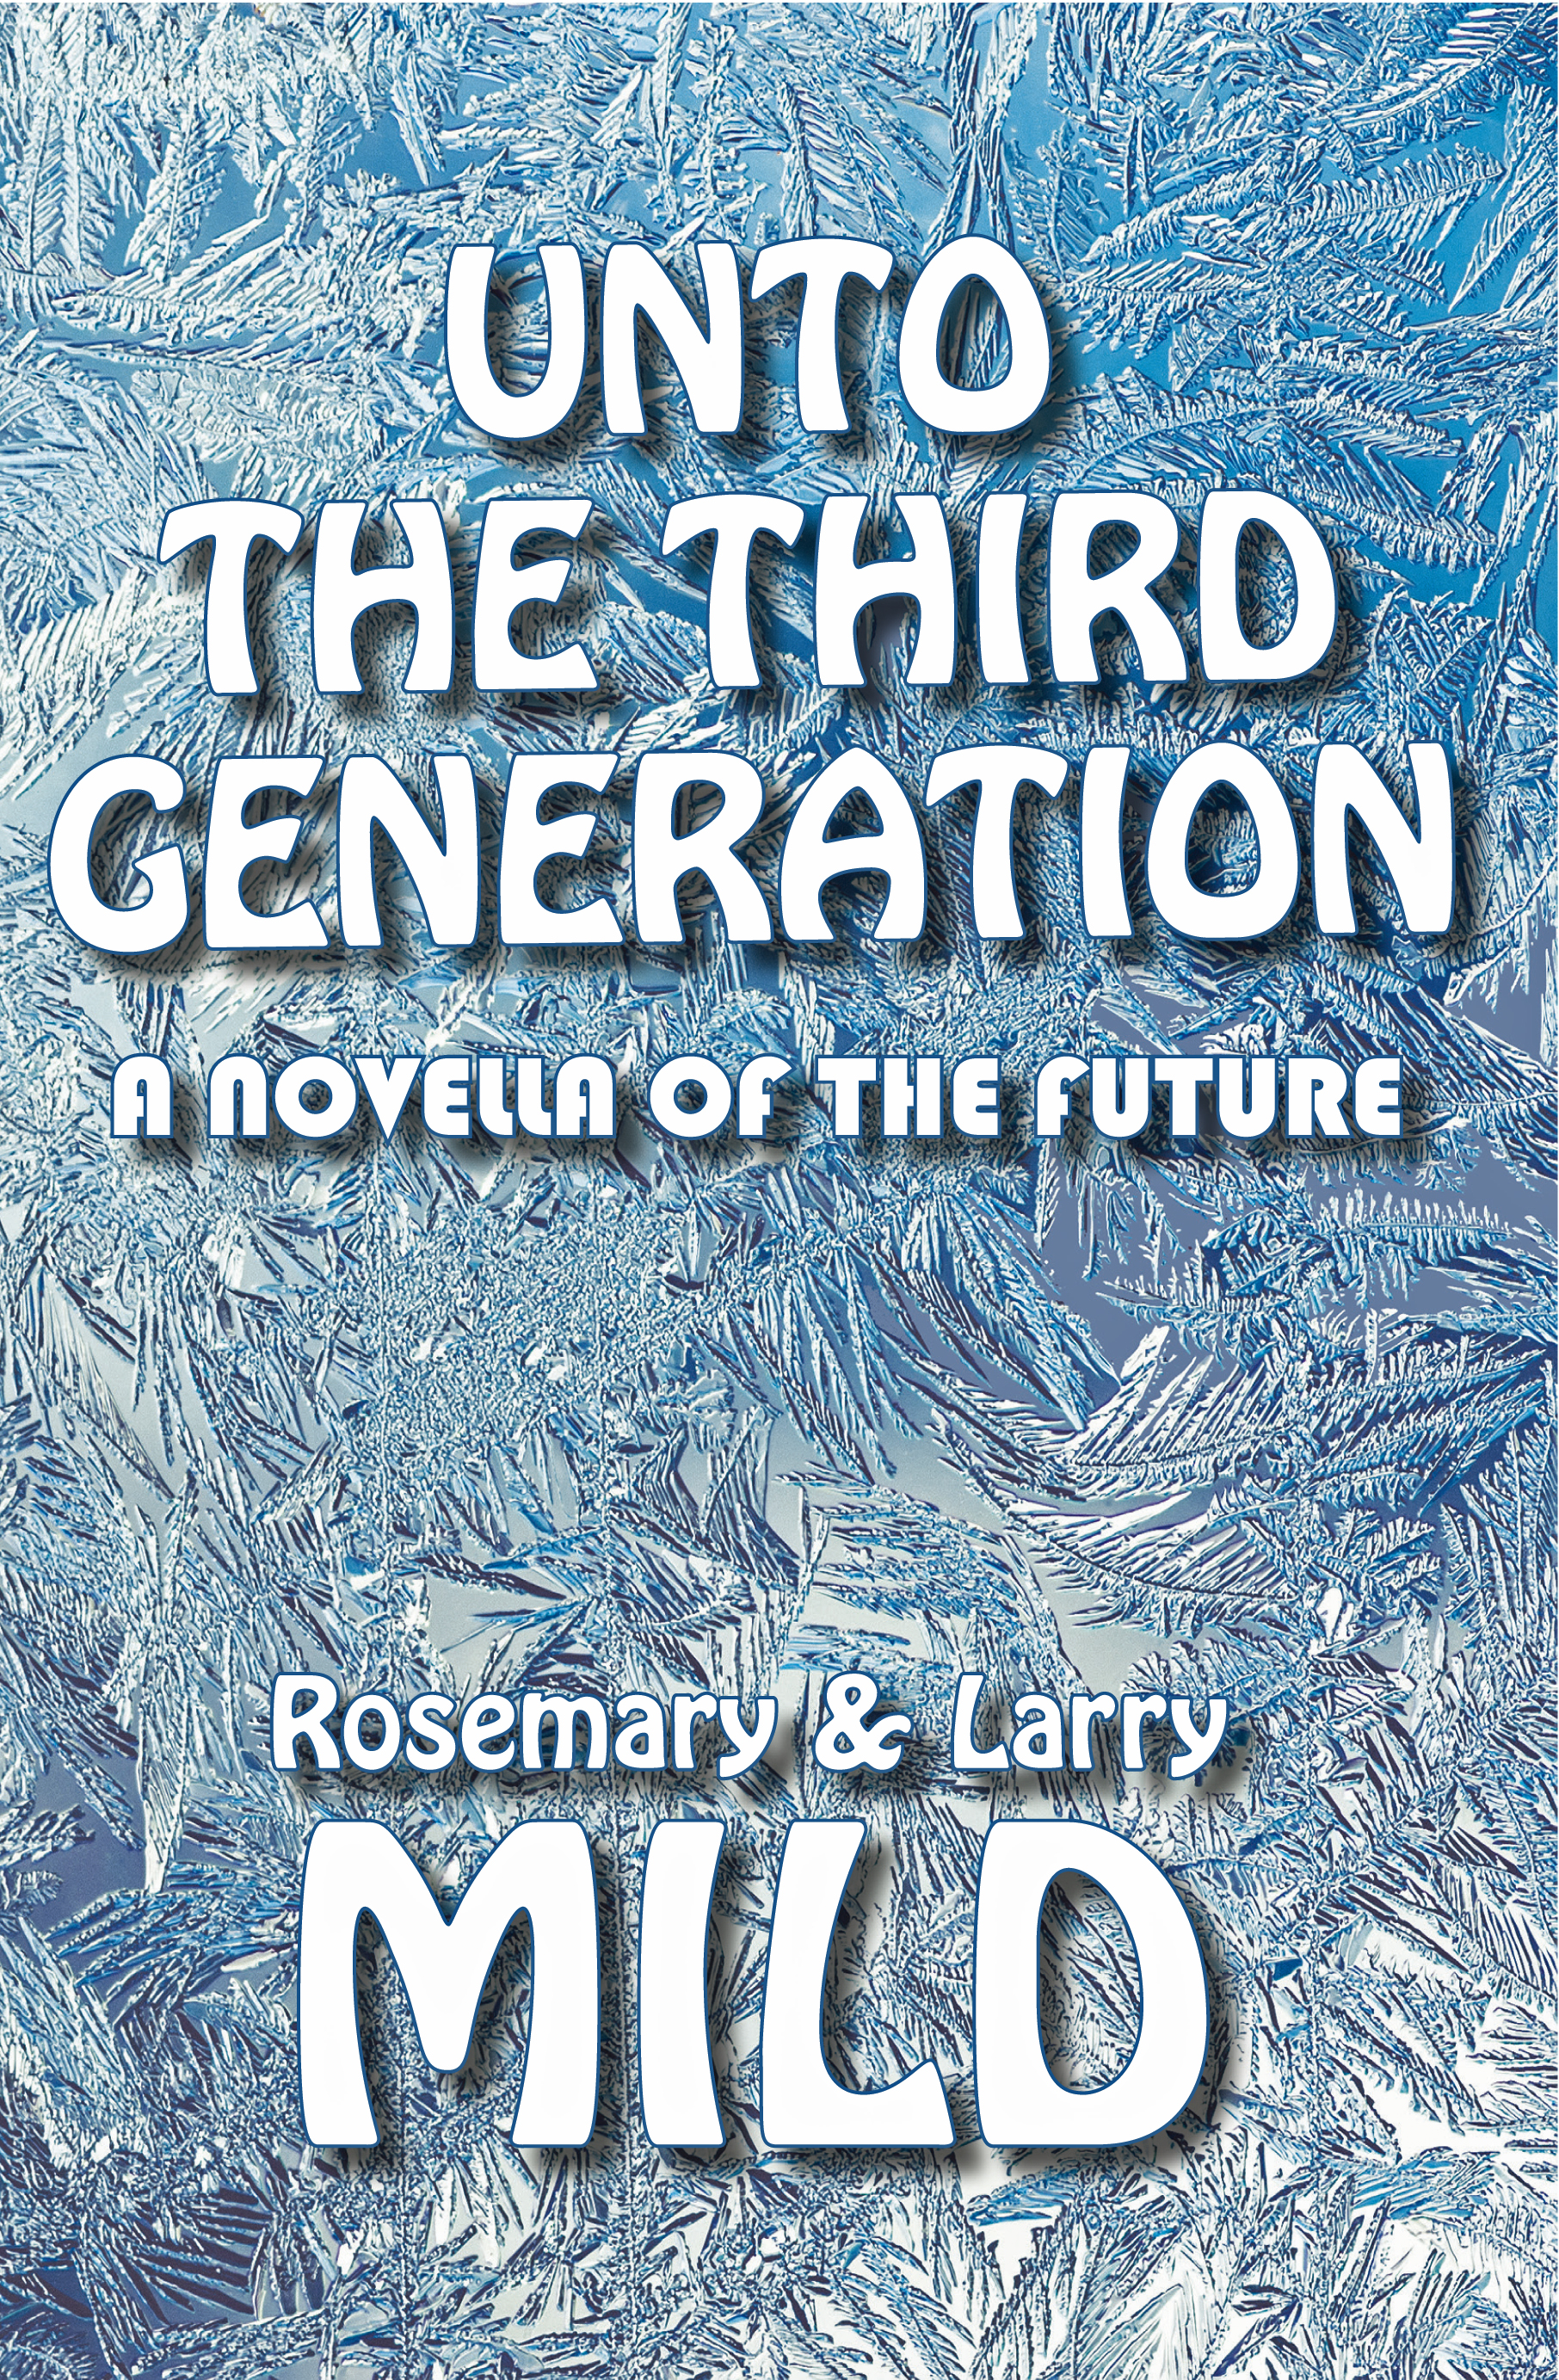 Unto the Third Generation, A Novella of the Future by Rosemary and Larry Mild